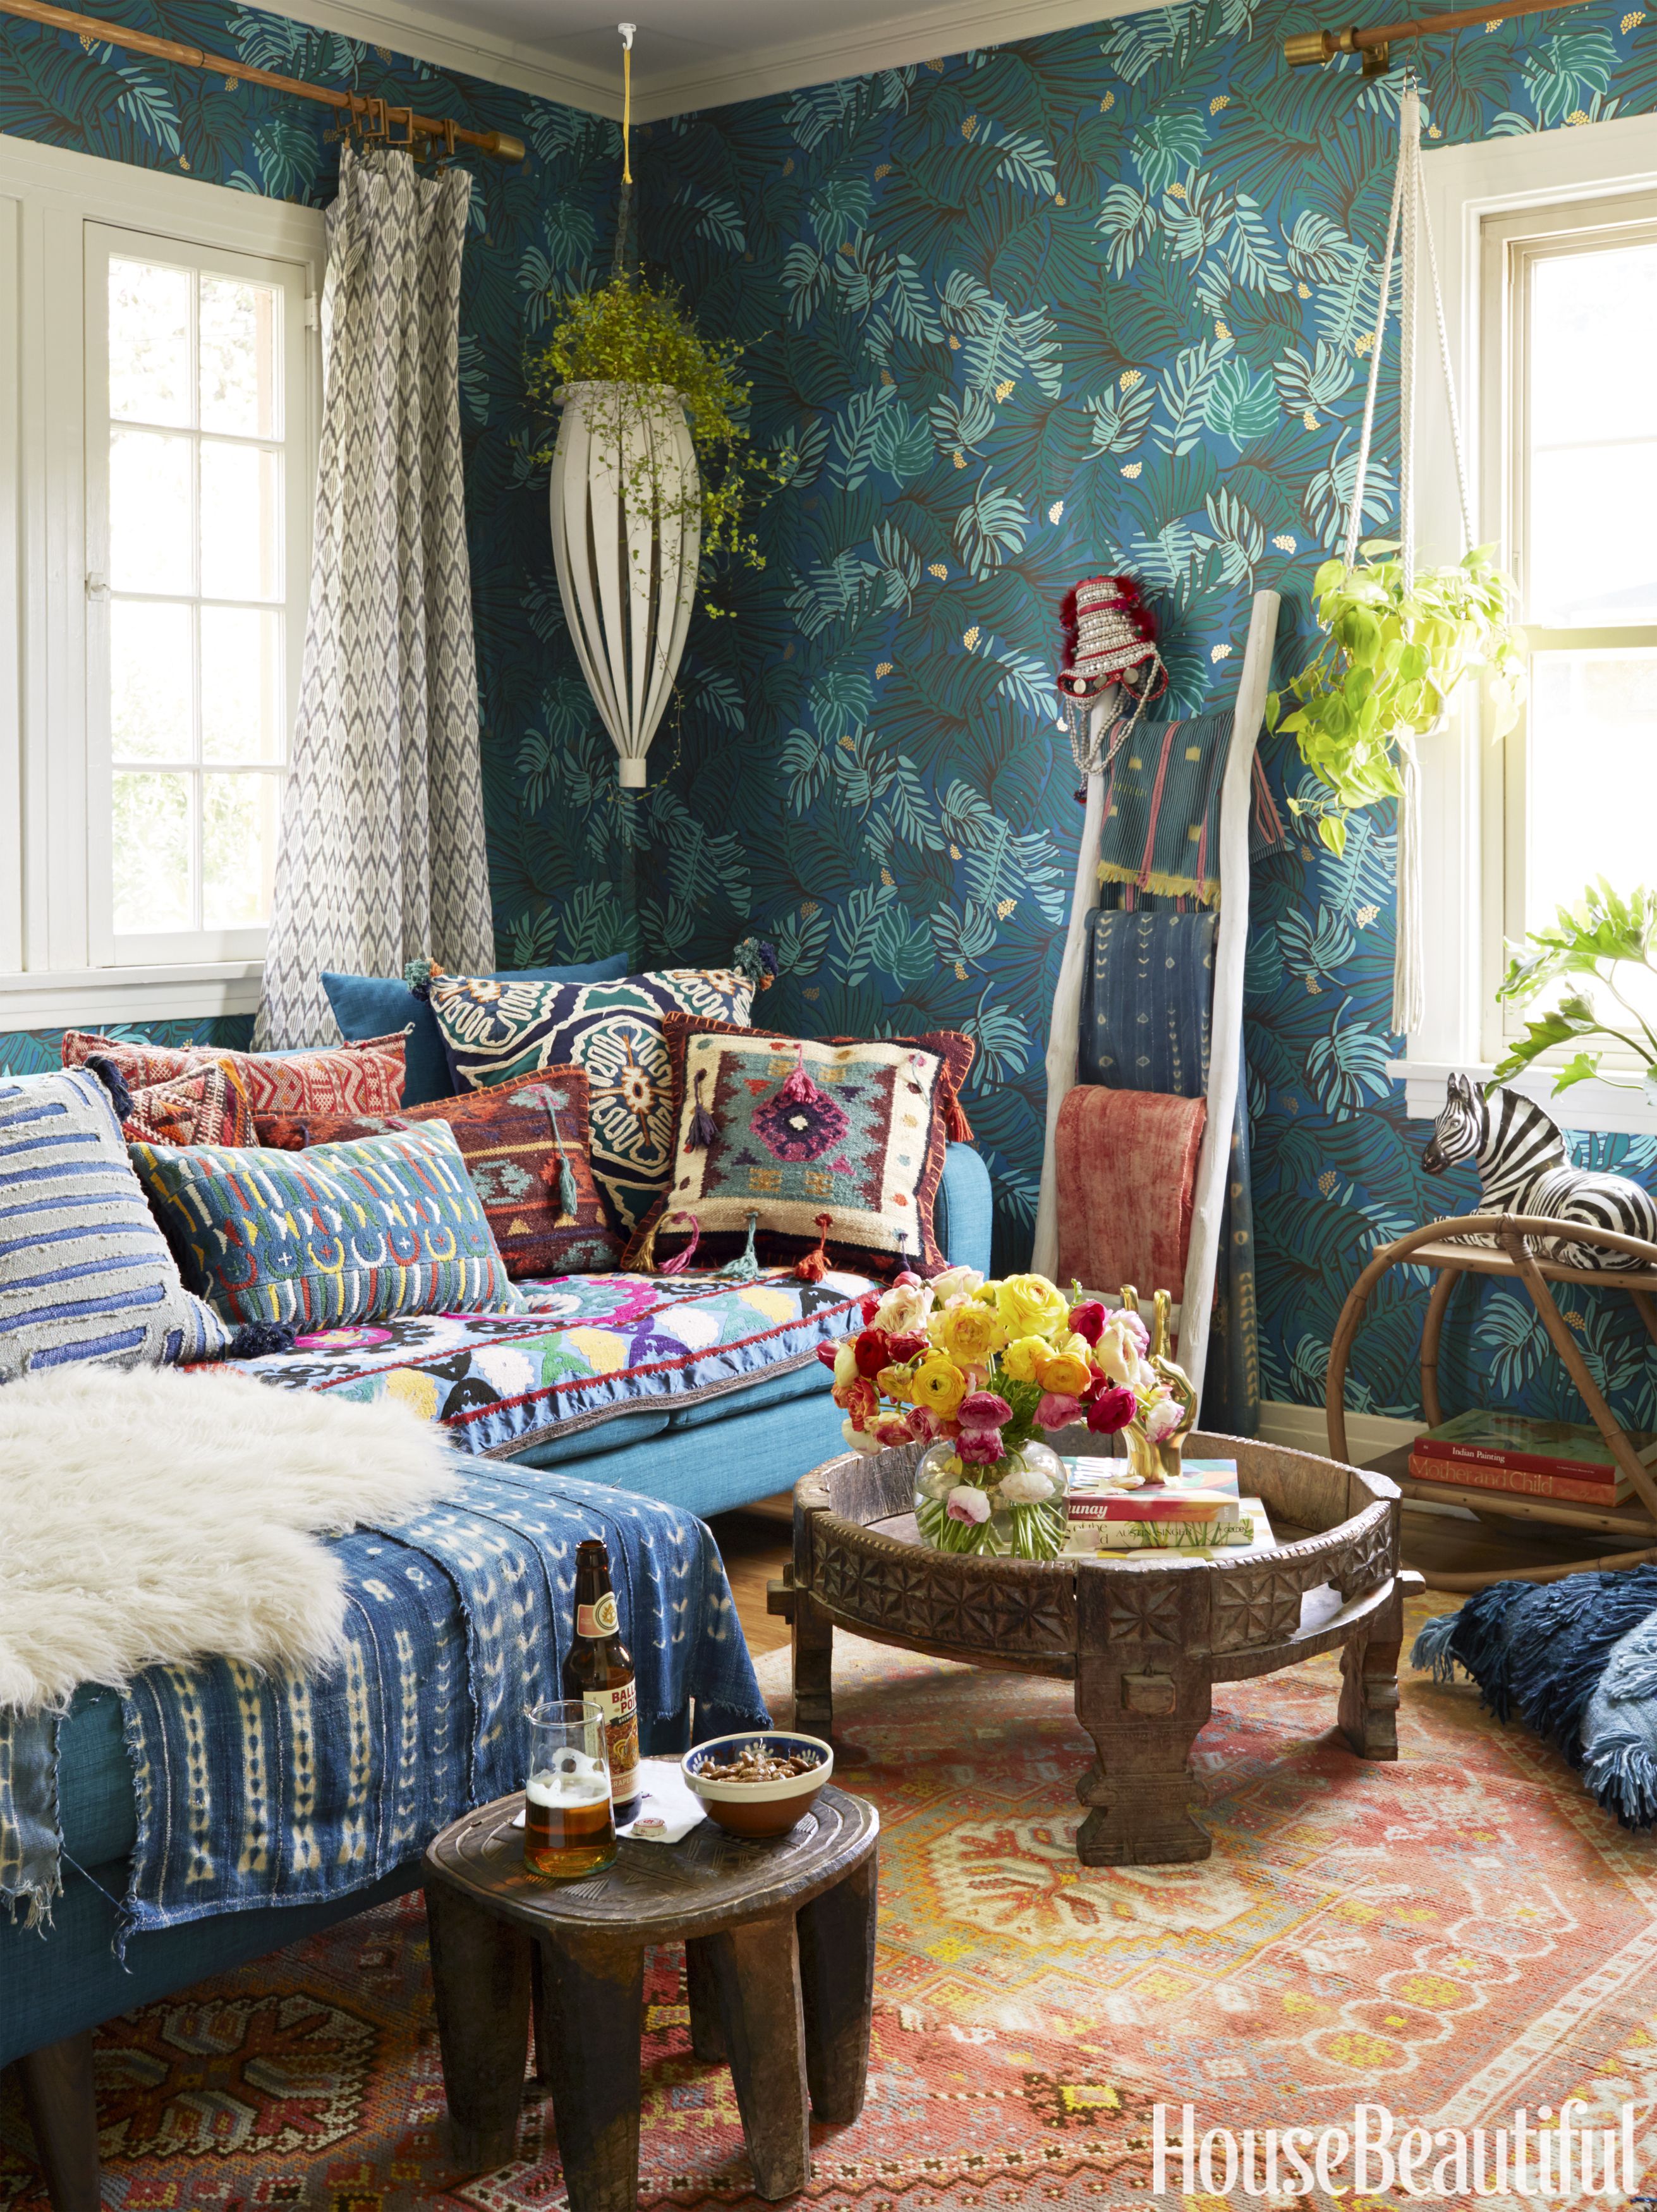 Moroccan Decor Style: How To Master The Look Like Experts